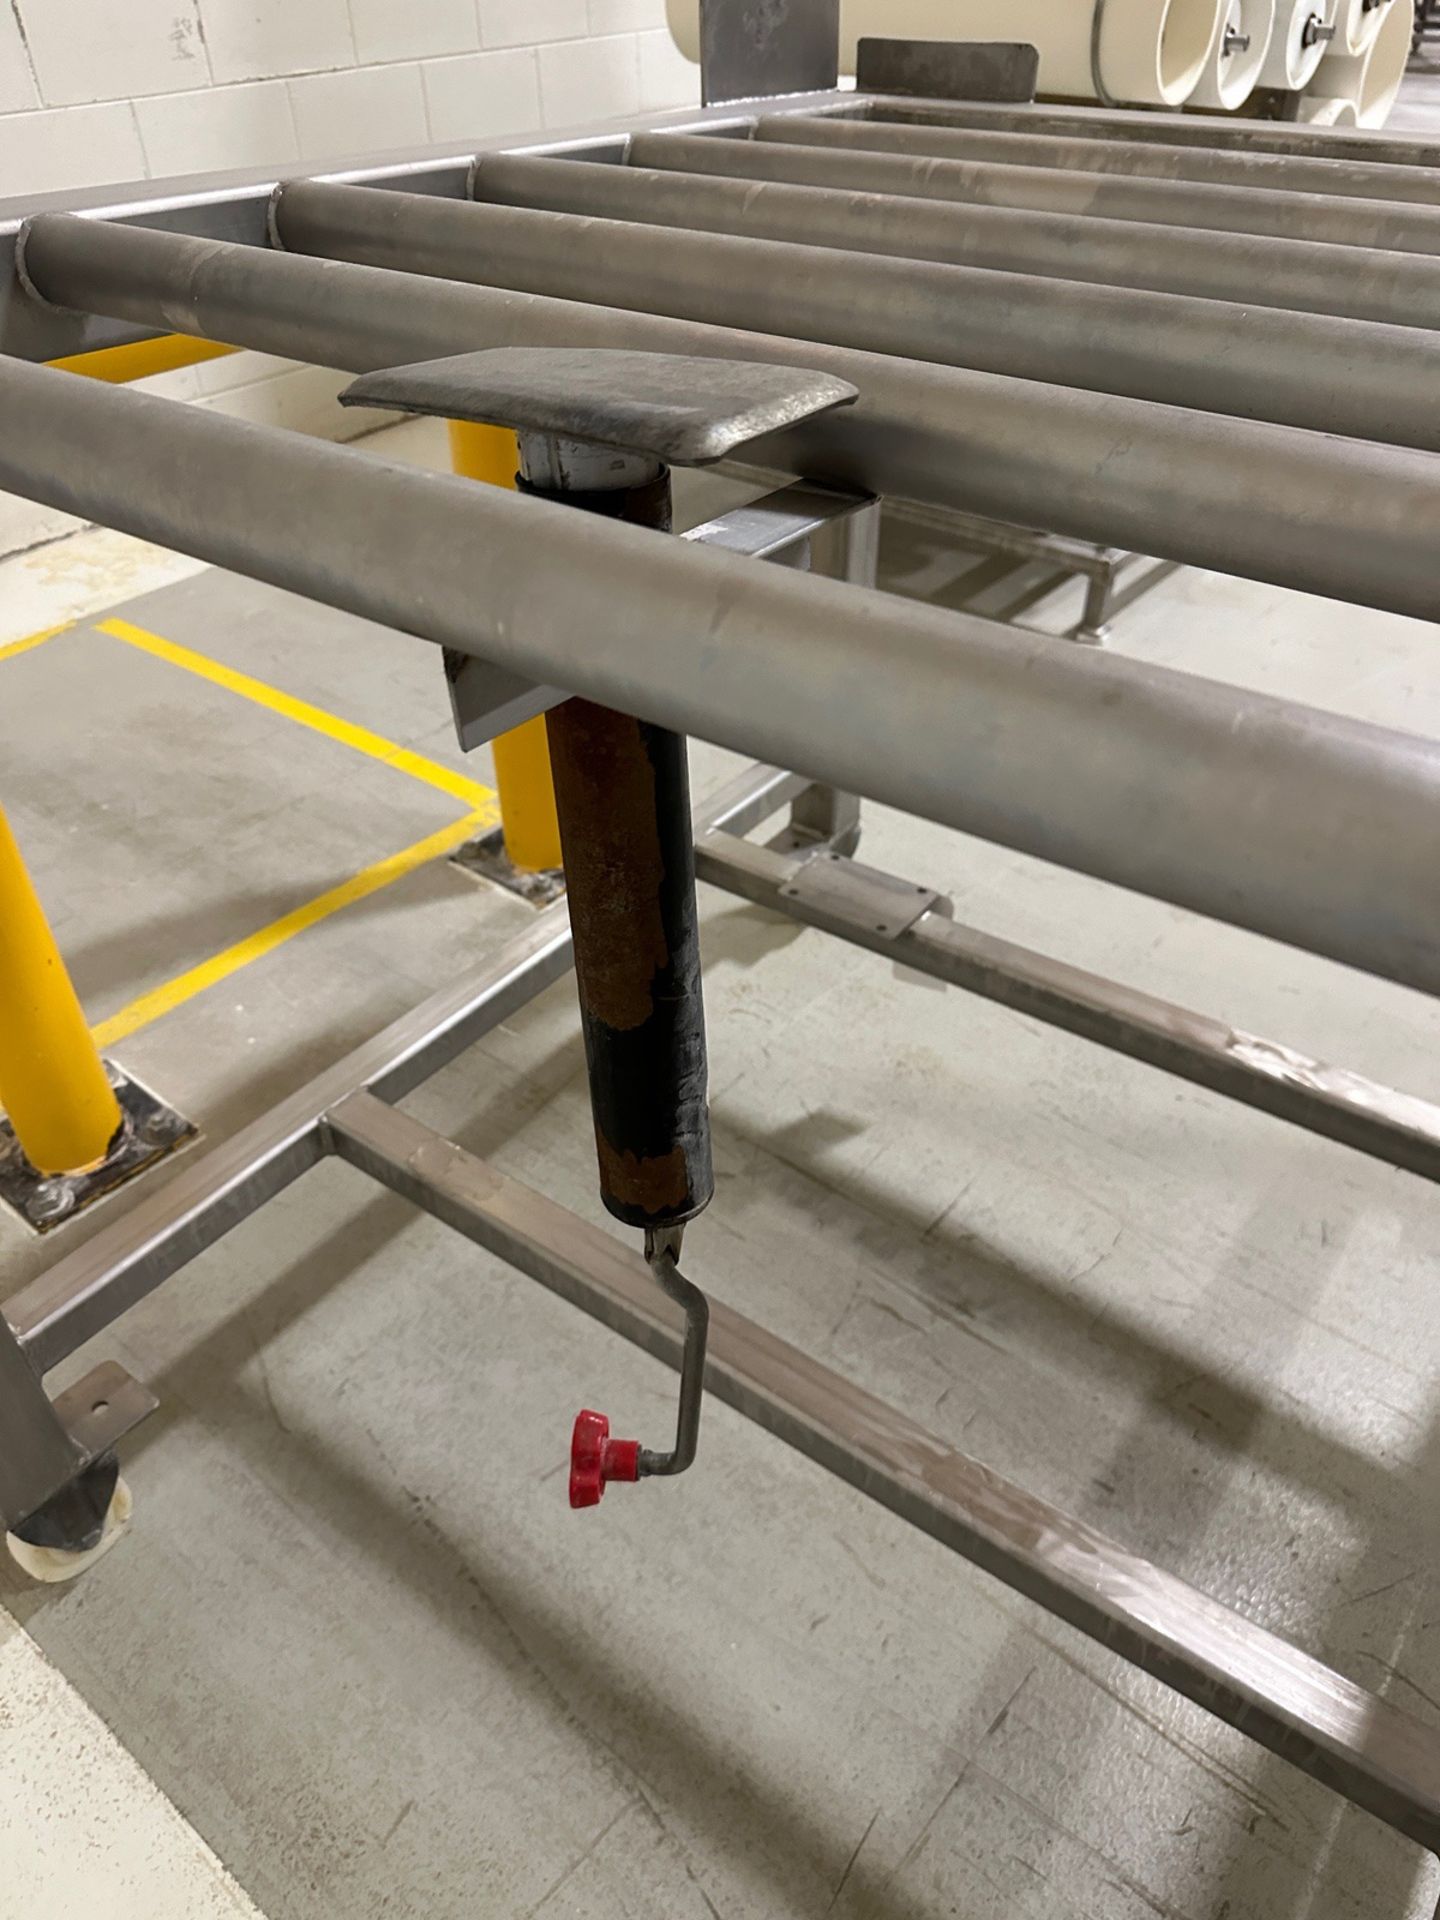 Stainless Steel Tote Stand with Hand Powered Tilting Jack | Rig Fee $25 - Image 2 of 2